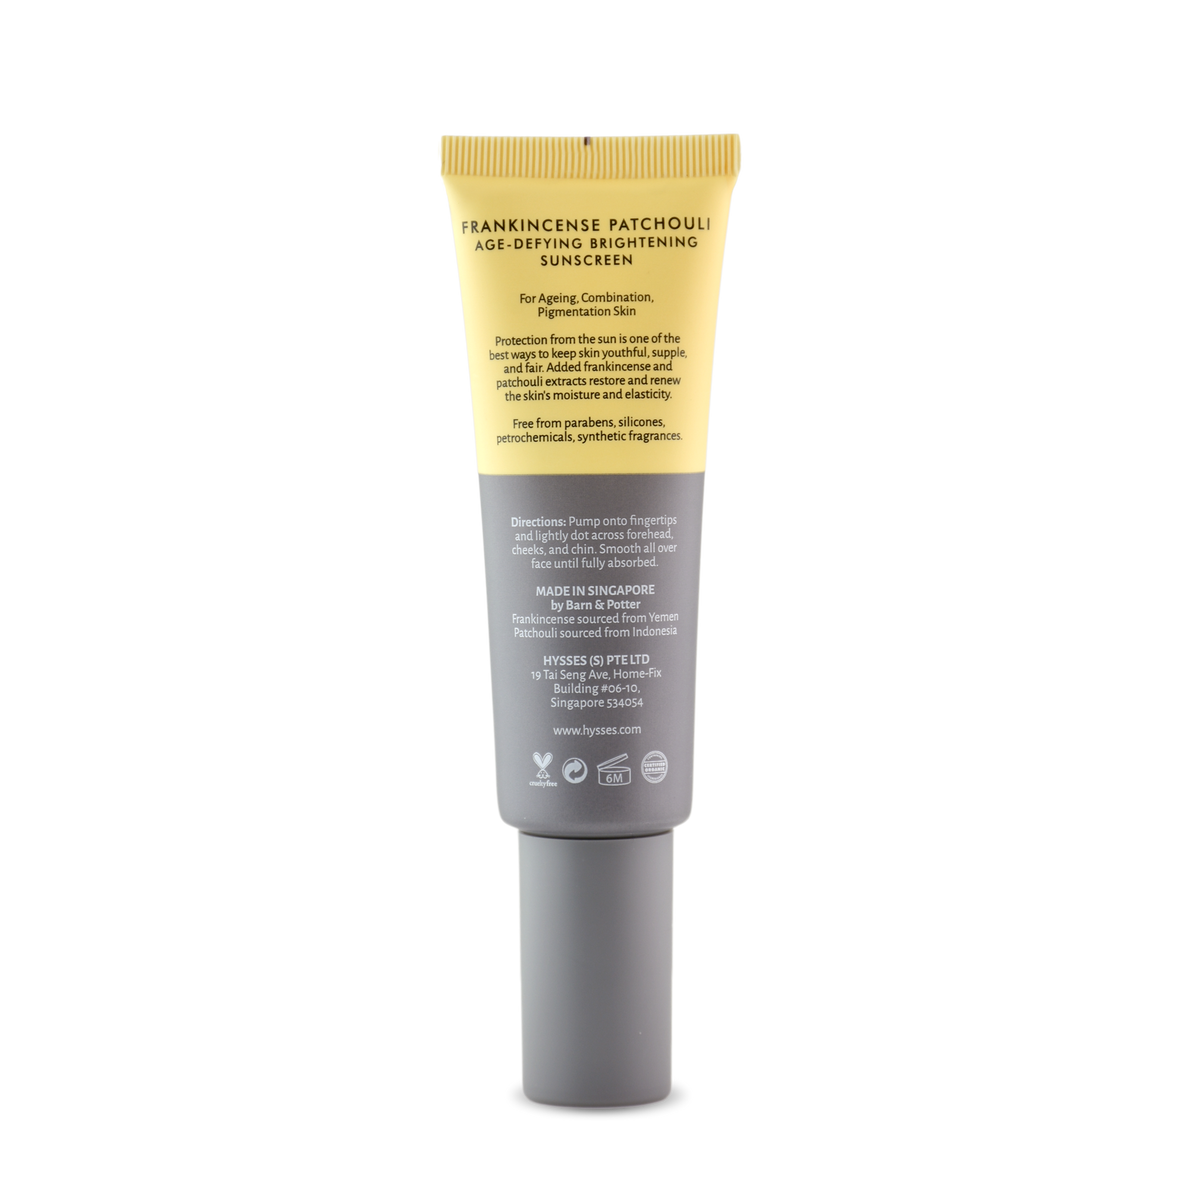 Age Defying Brightening Sunscreen Frankincense Patchouli SPF 40 / PA++